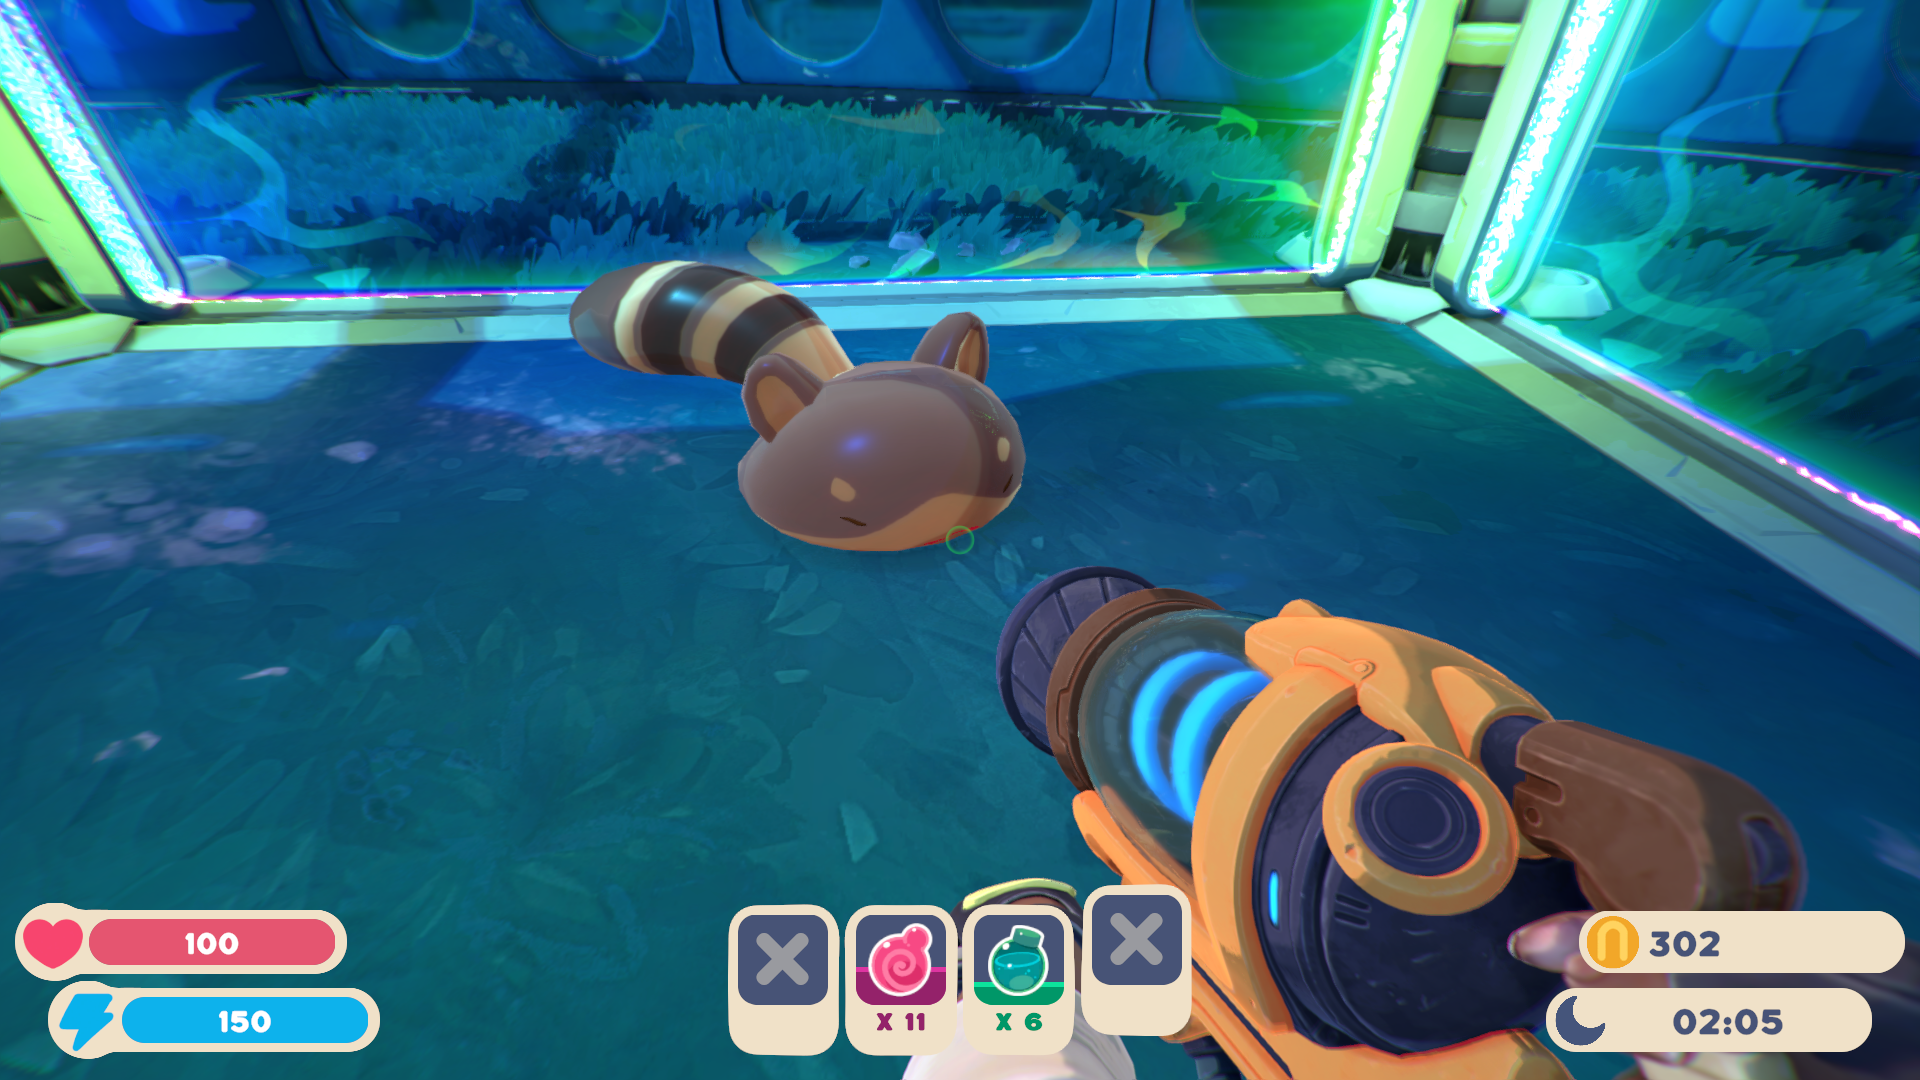 Slime Rancher 2 isn't on Xbox One, here's why